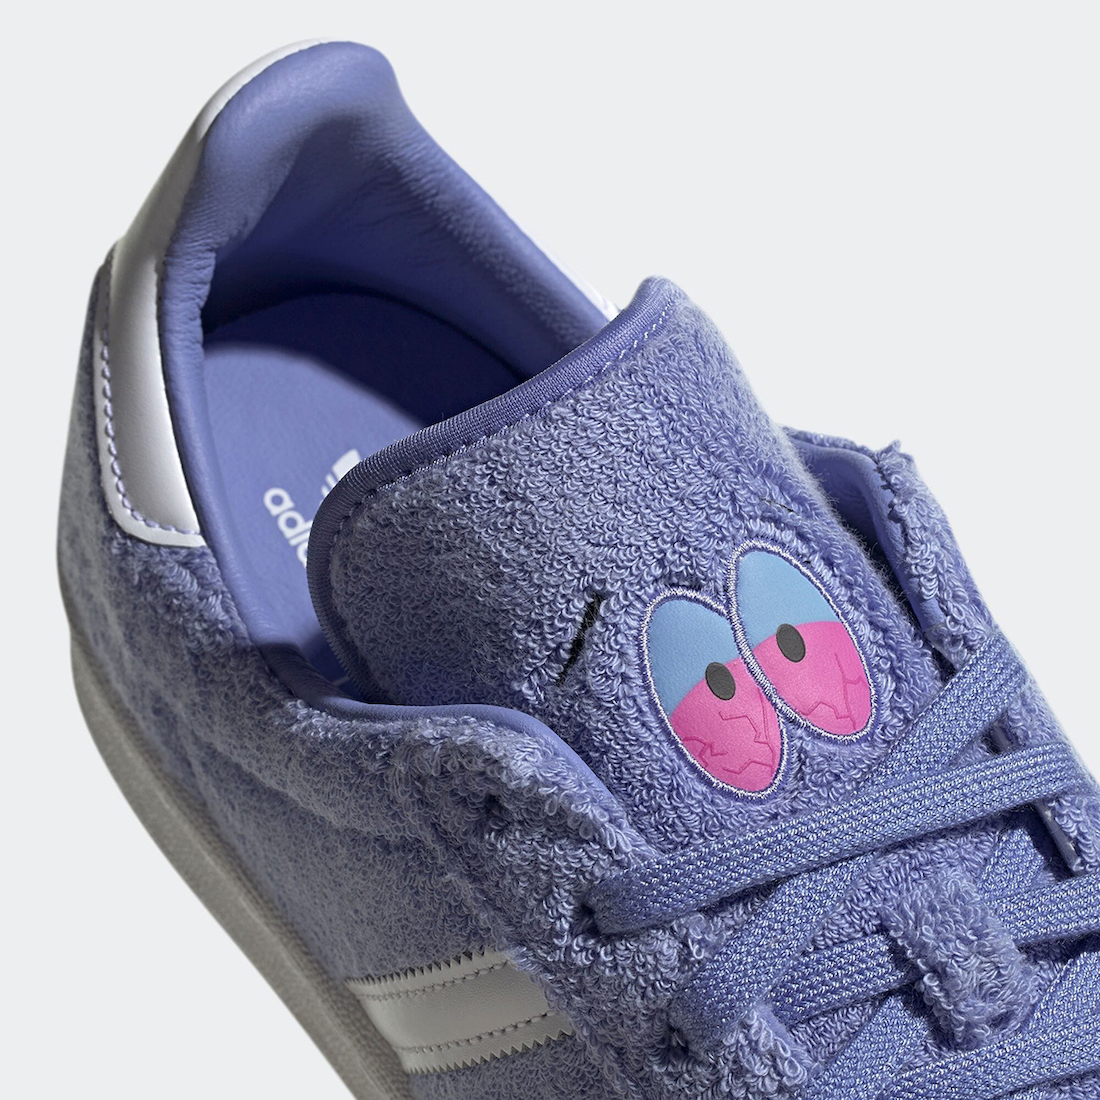 South-Park-adidas-Campus-80s-Towelie-GZ9177-Release-Date-7